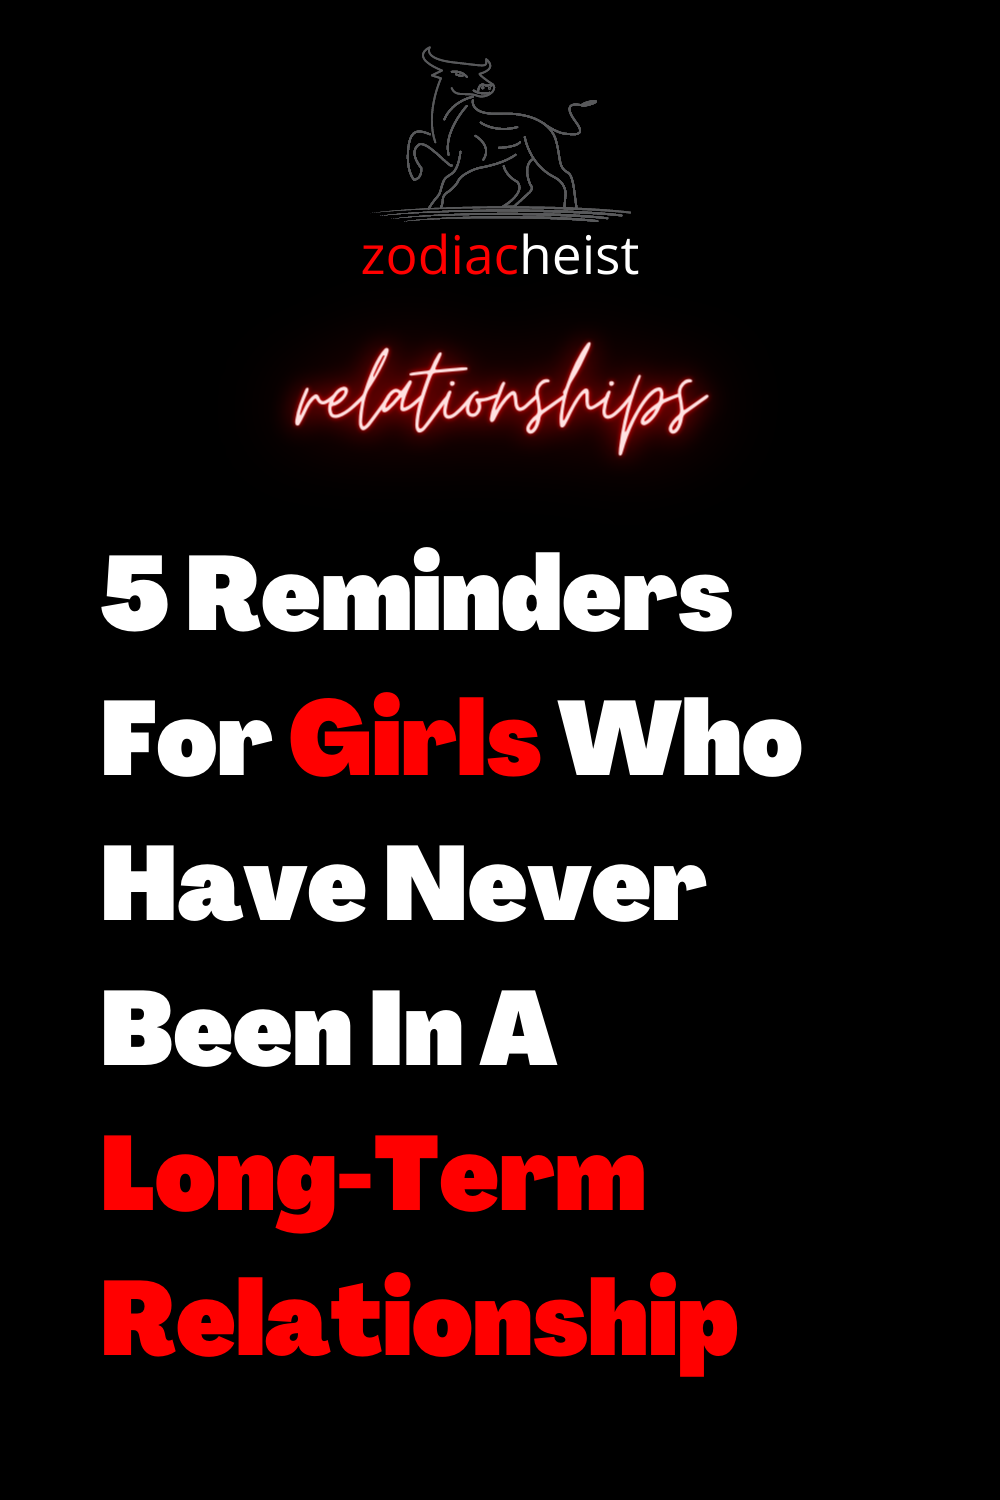 5 Reminders For Girls Who Have Never Been In A Long-Term Relationship